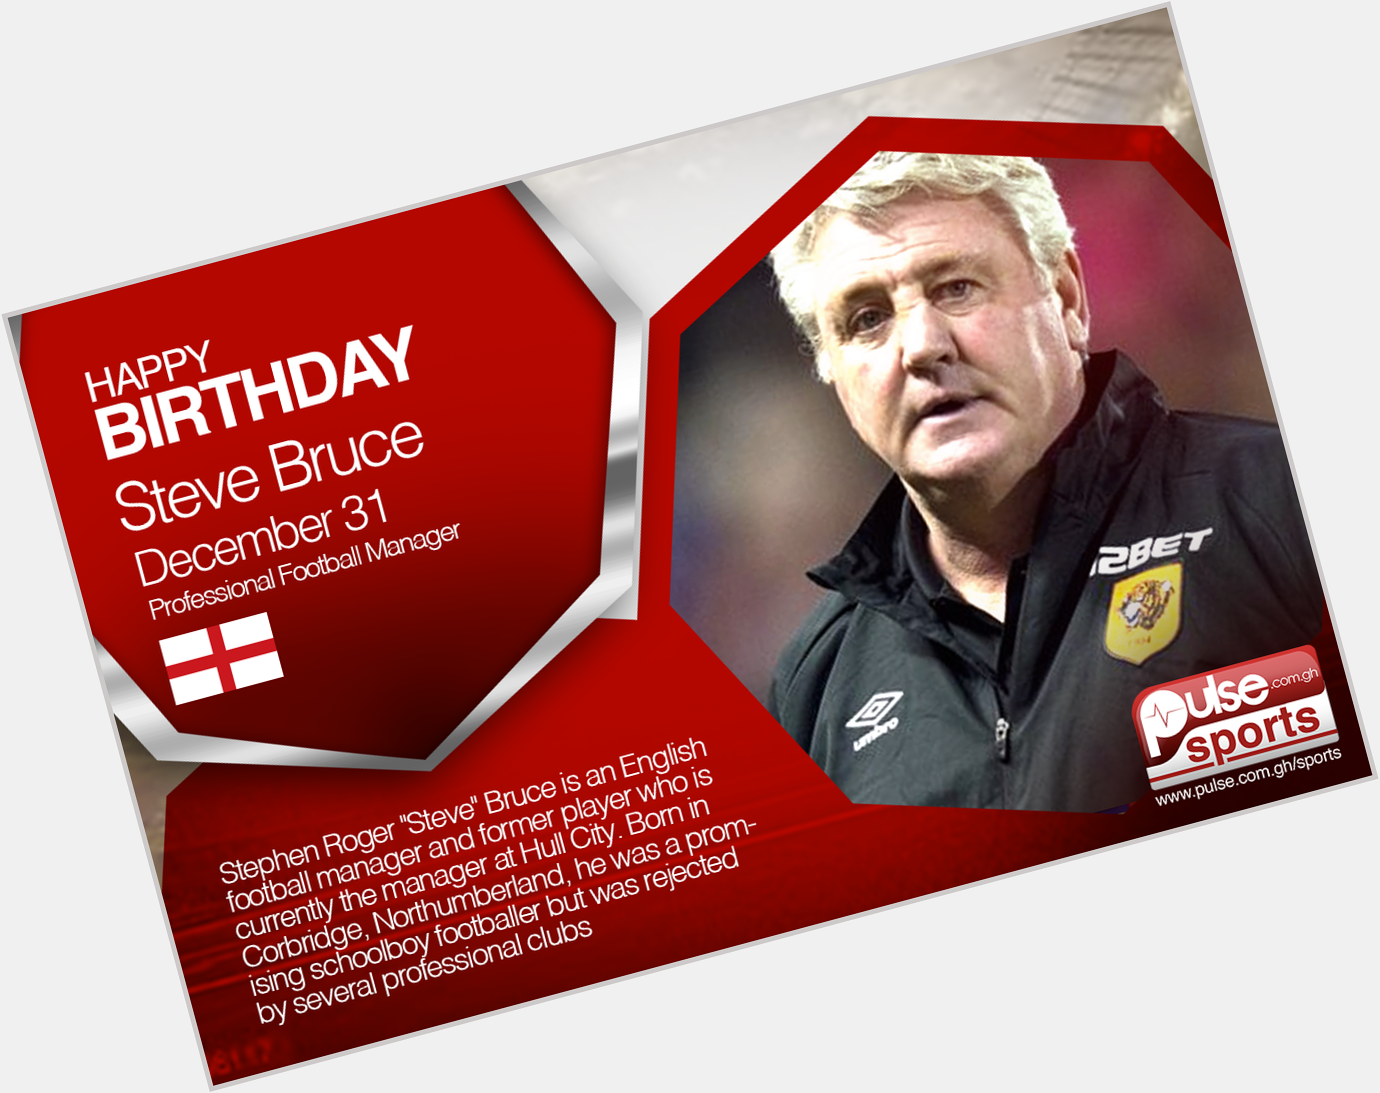 Join us in wishing Great & Manager, Steve Bruce, A Happy 55th Birthday!    